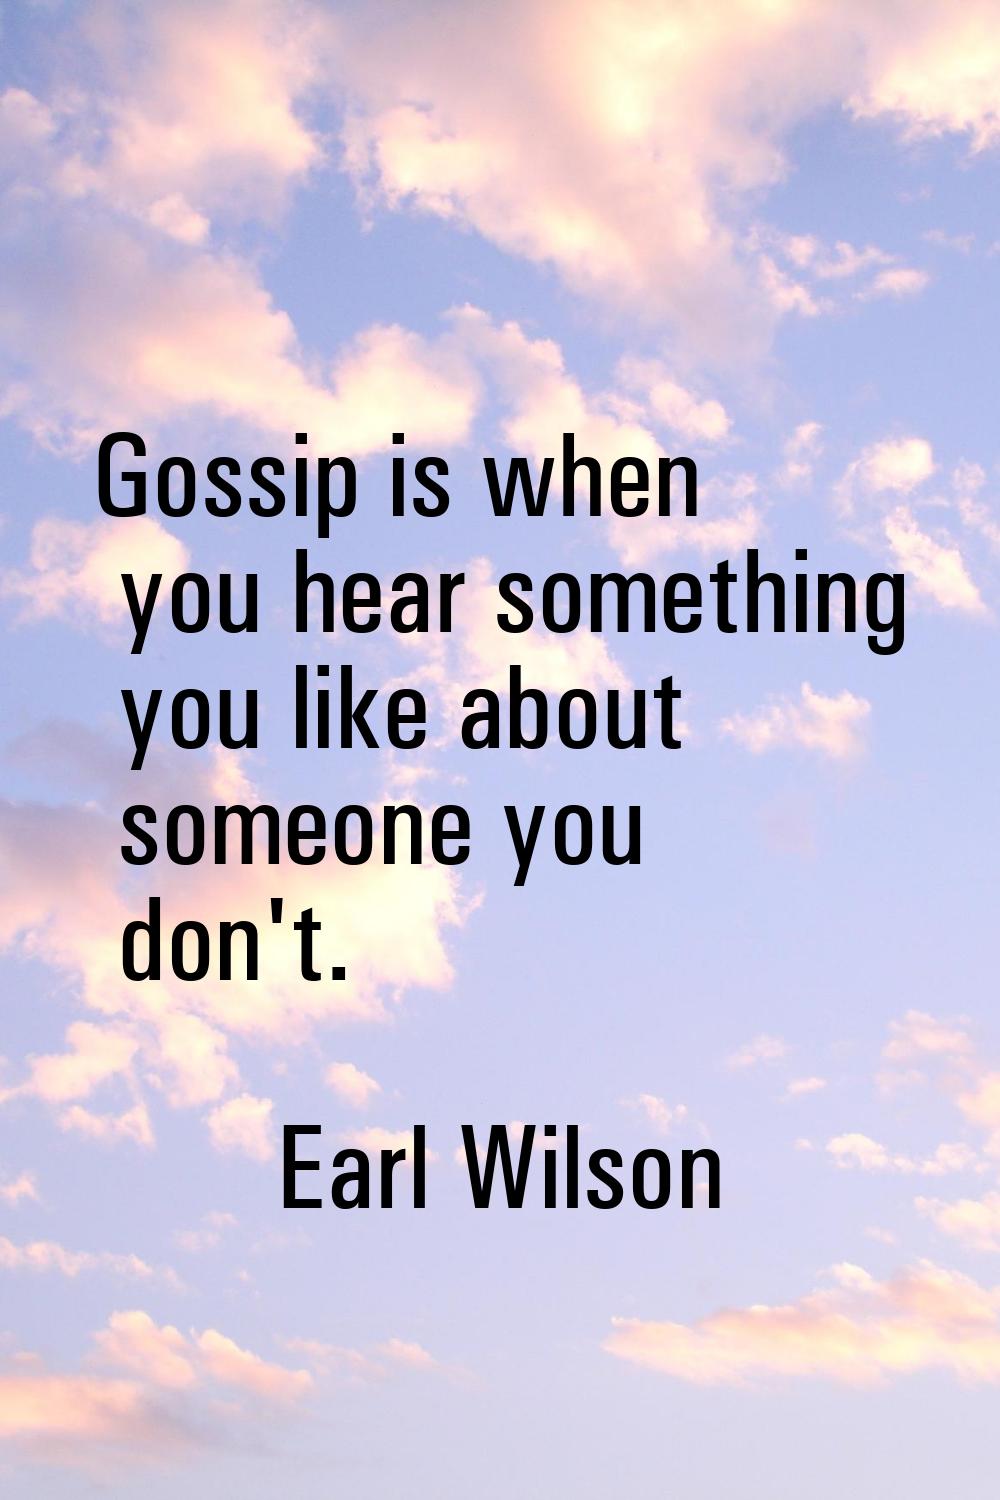 Gossip is when you hear something you like about someone you don't.